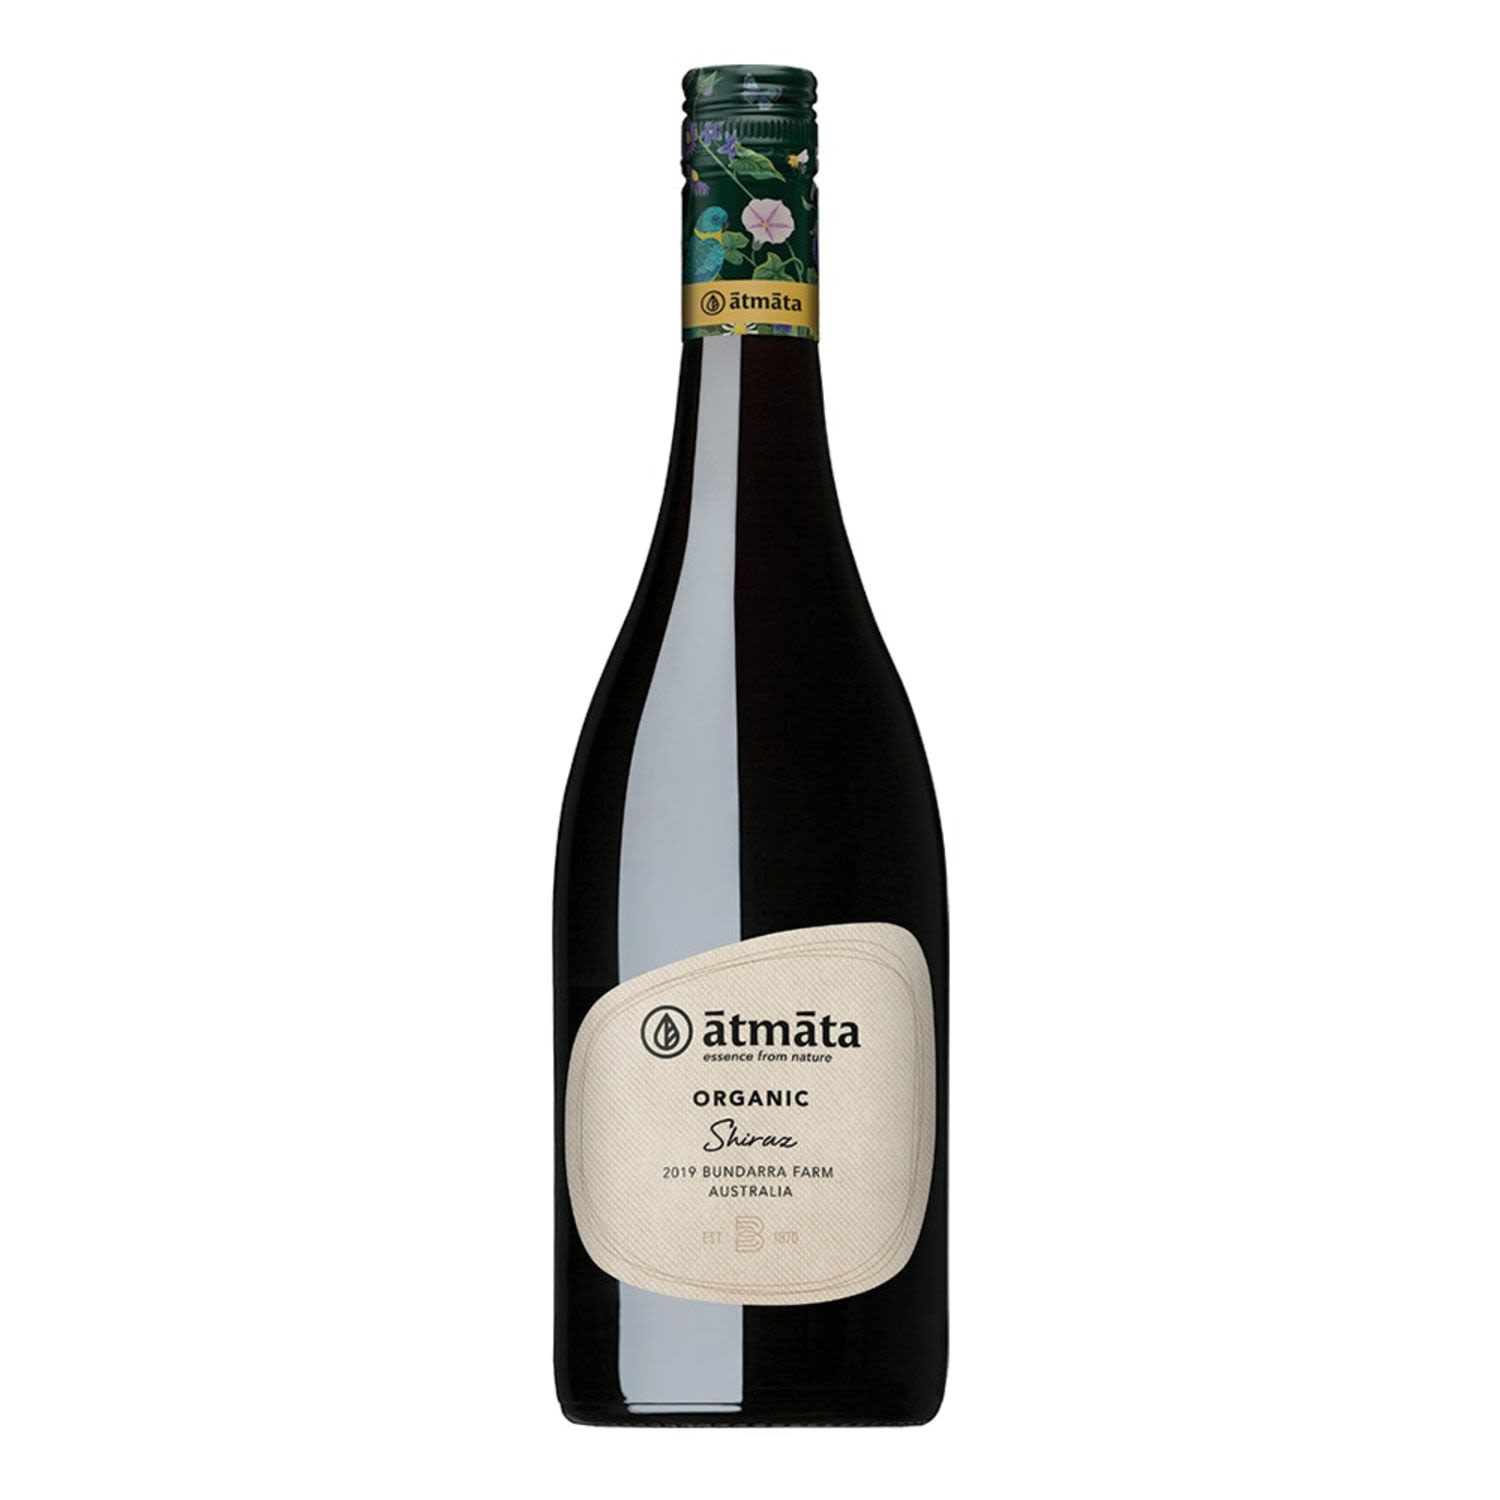 Atmata Organic Shiraz is rich, round & full-bodied with dark spices wrapped in red berry fruits.<br /> <br />Alcohol Volume: 14.50%<br /><br />Pack Format: Bottle<br /><br />Standard Drinks: 8.6</br /><br />Pack Type: Bottle<br /><br />Country of Origin: Australia<br /><br />Region: Australia<br /><br />Vintage: Vintages Vary<br />